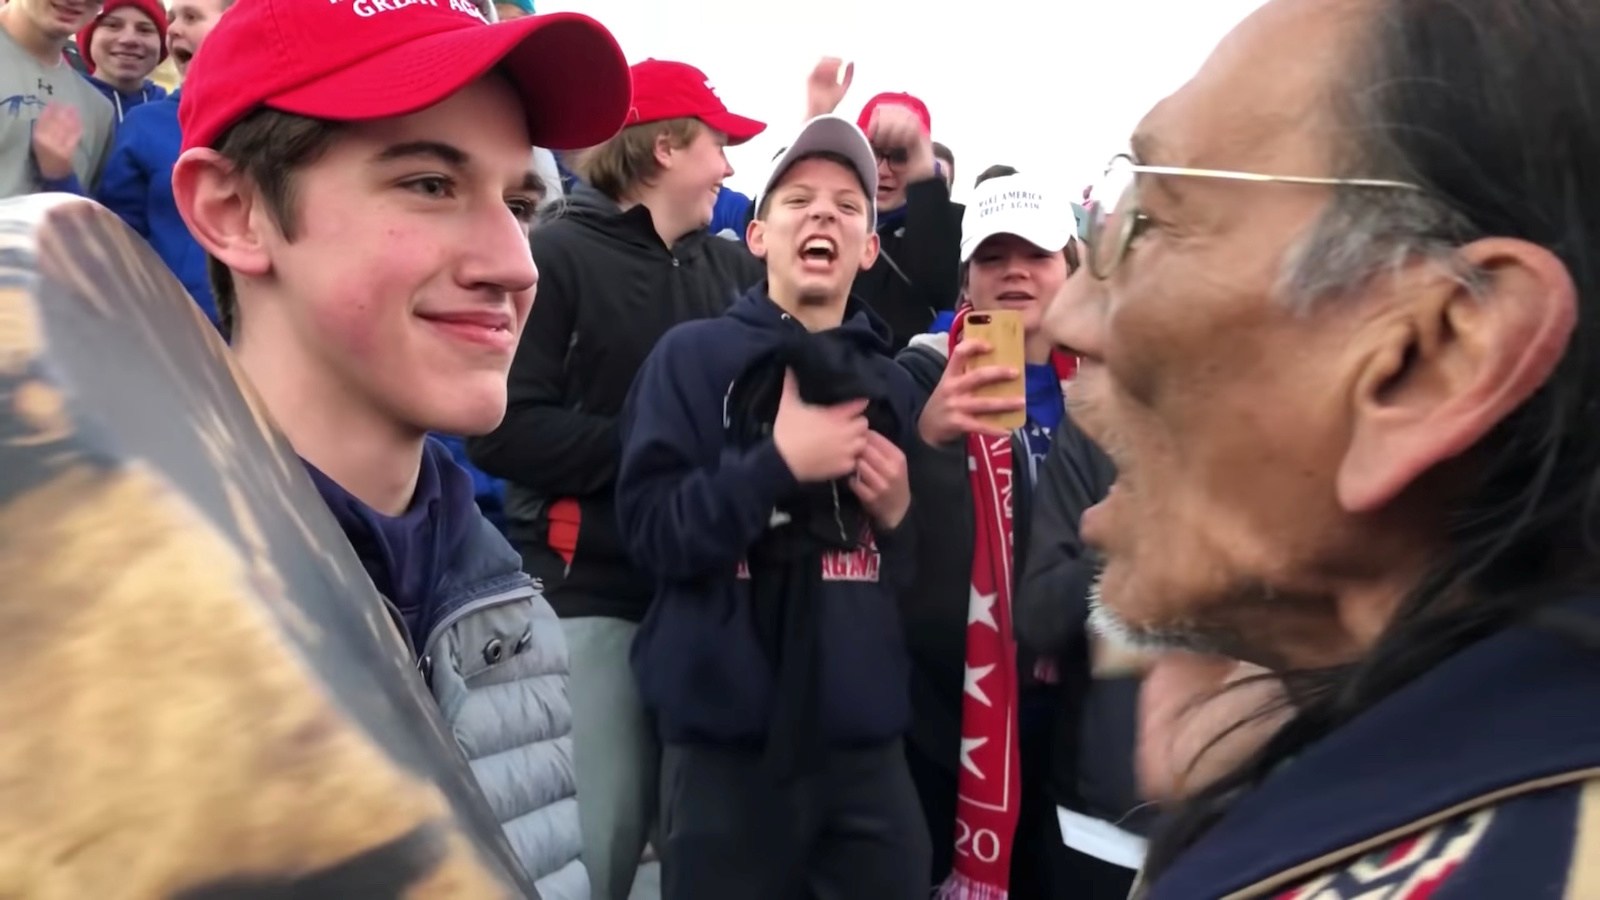 Student from Covington Catholic HS in front of Nathan Phillips in Washington